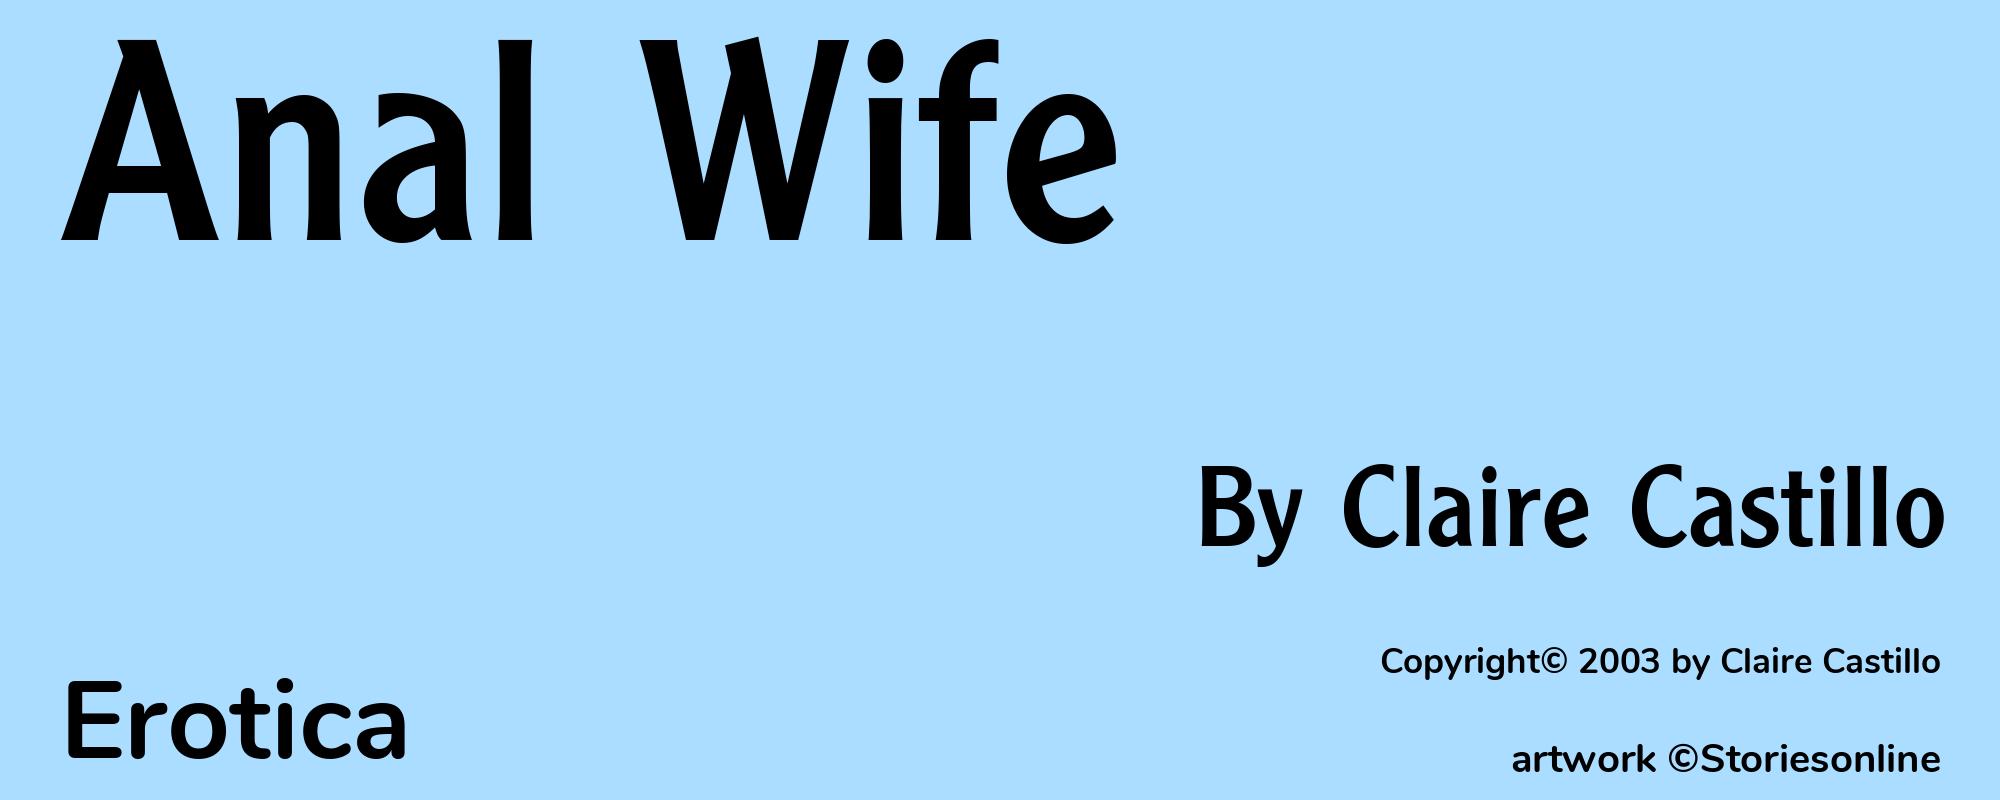 Anal Wife - Cover